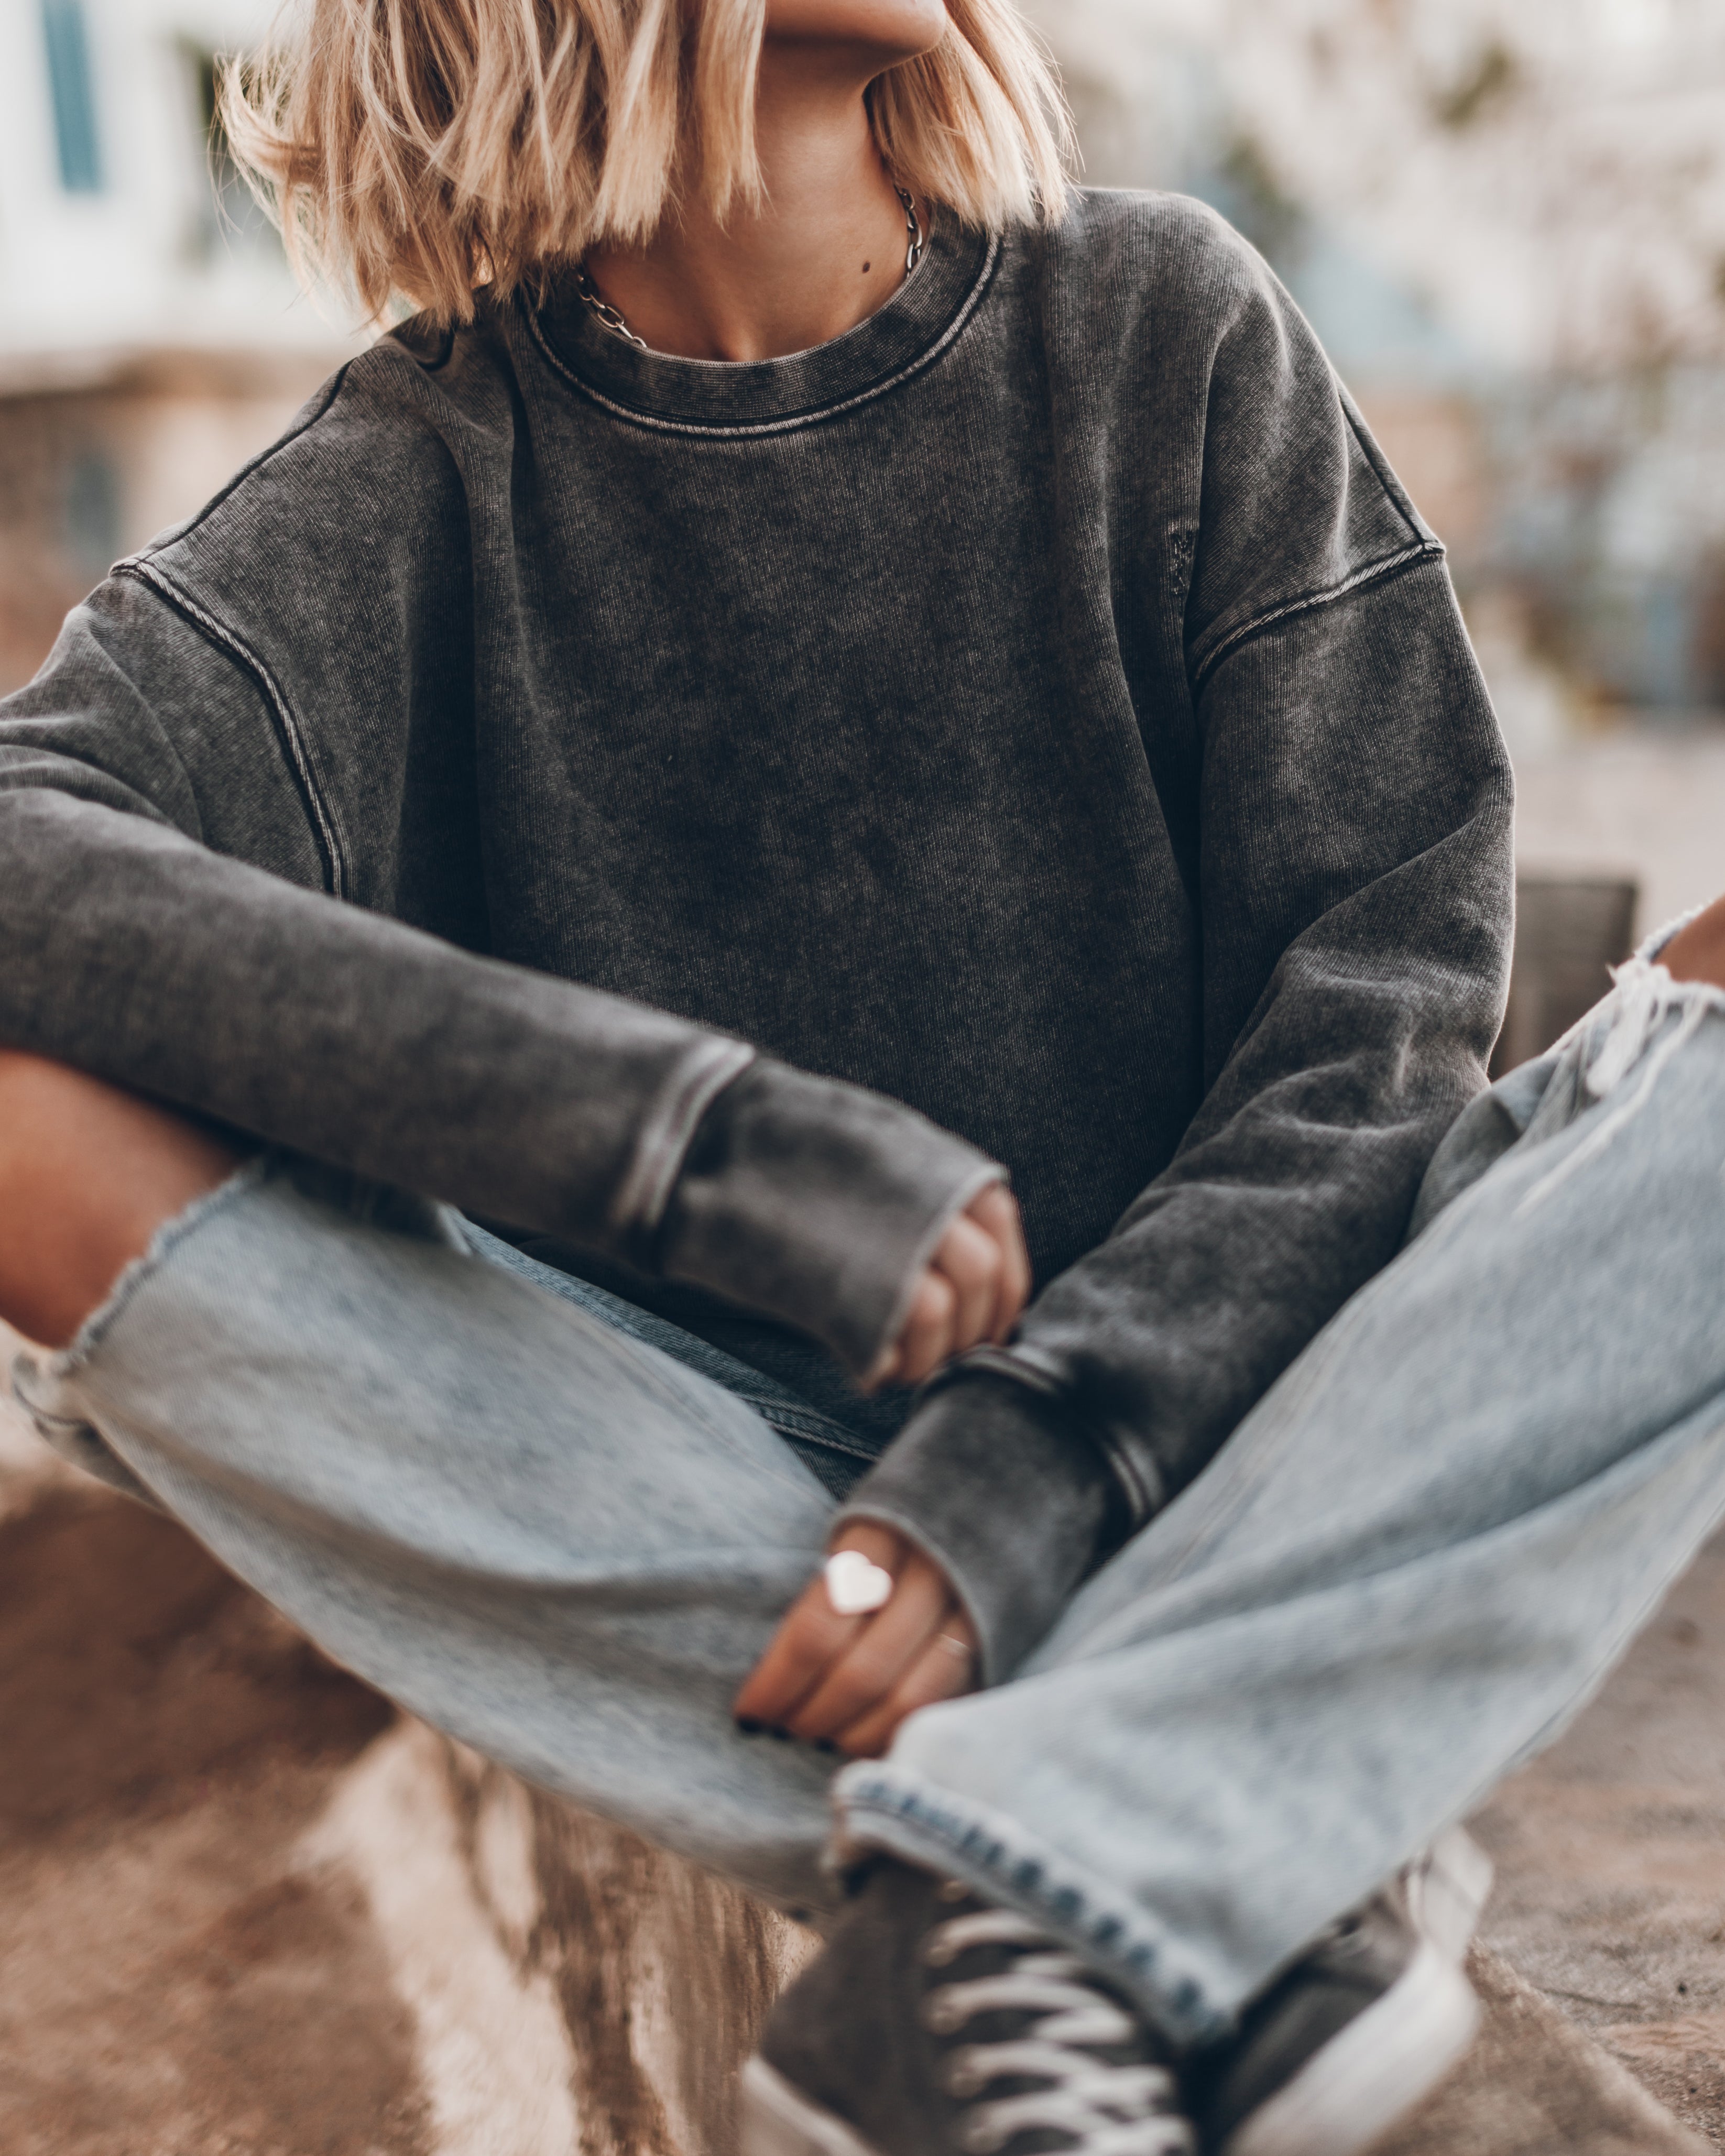 The Marble Grey Cozy Base Sweater